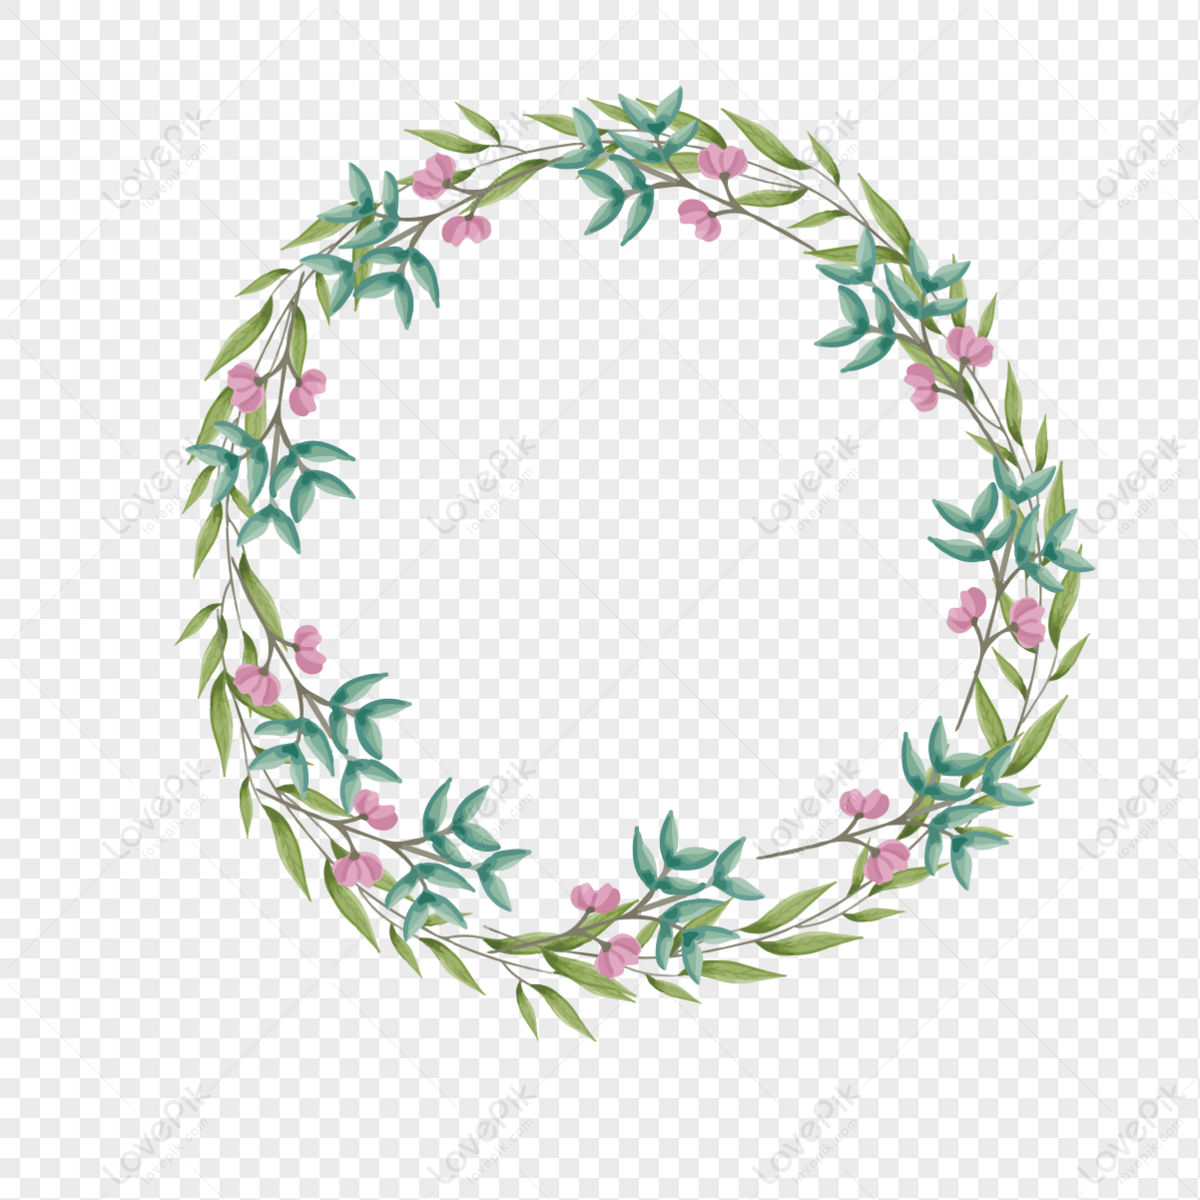 Garland Icon Free Vector Illustration Material PNG Transparent And ...